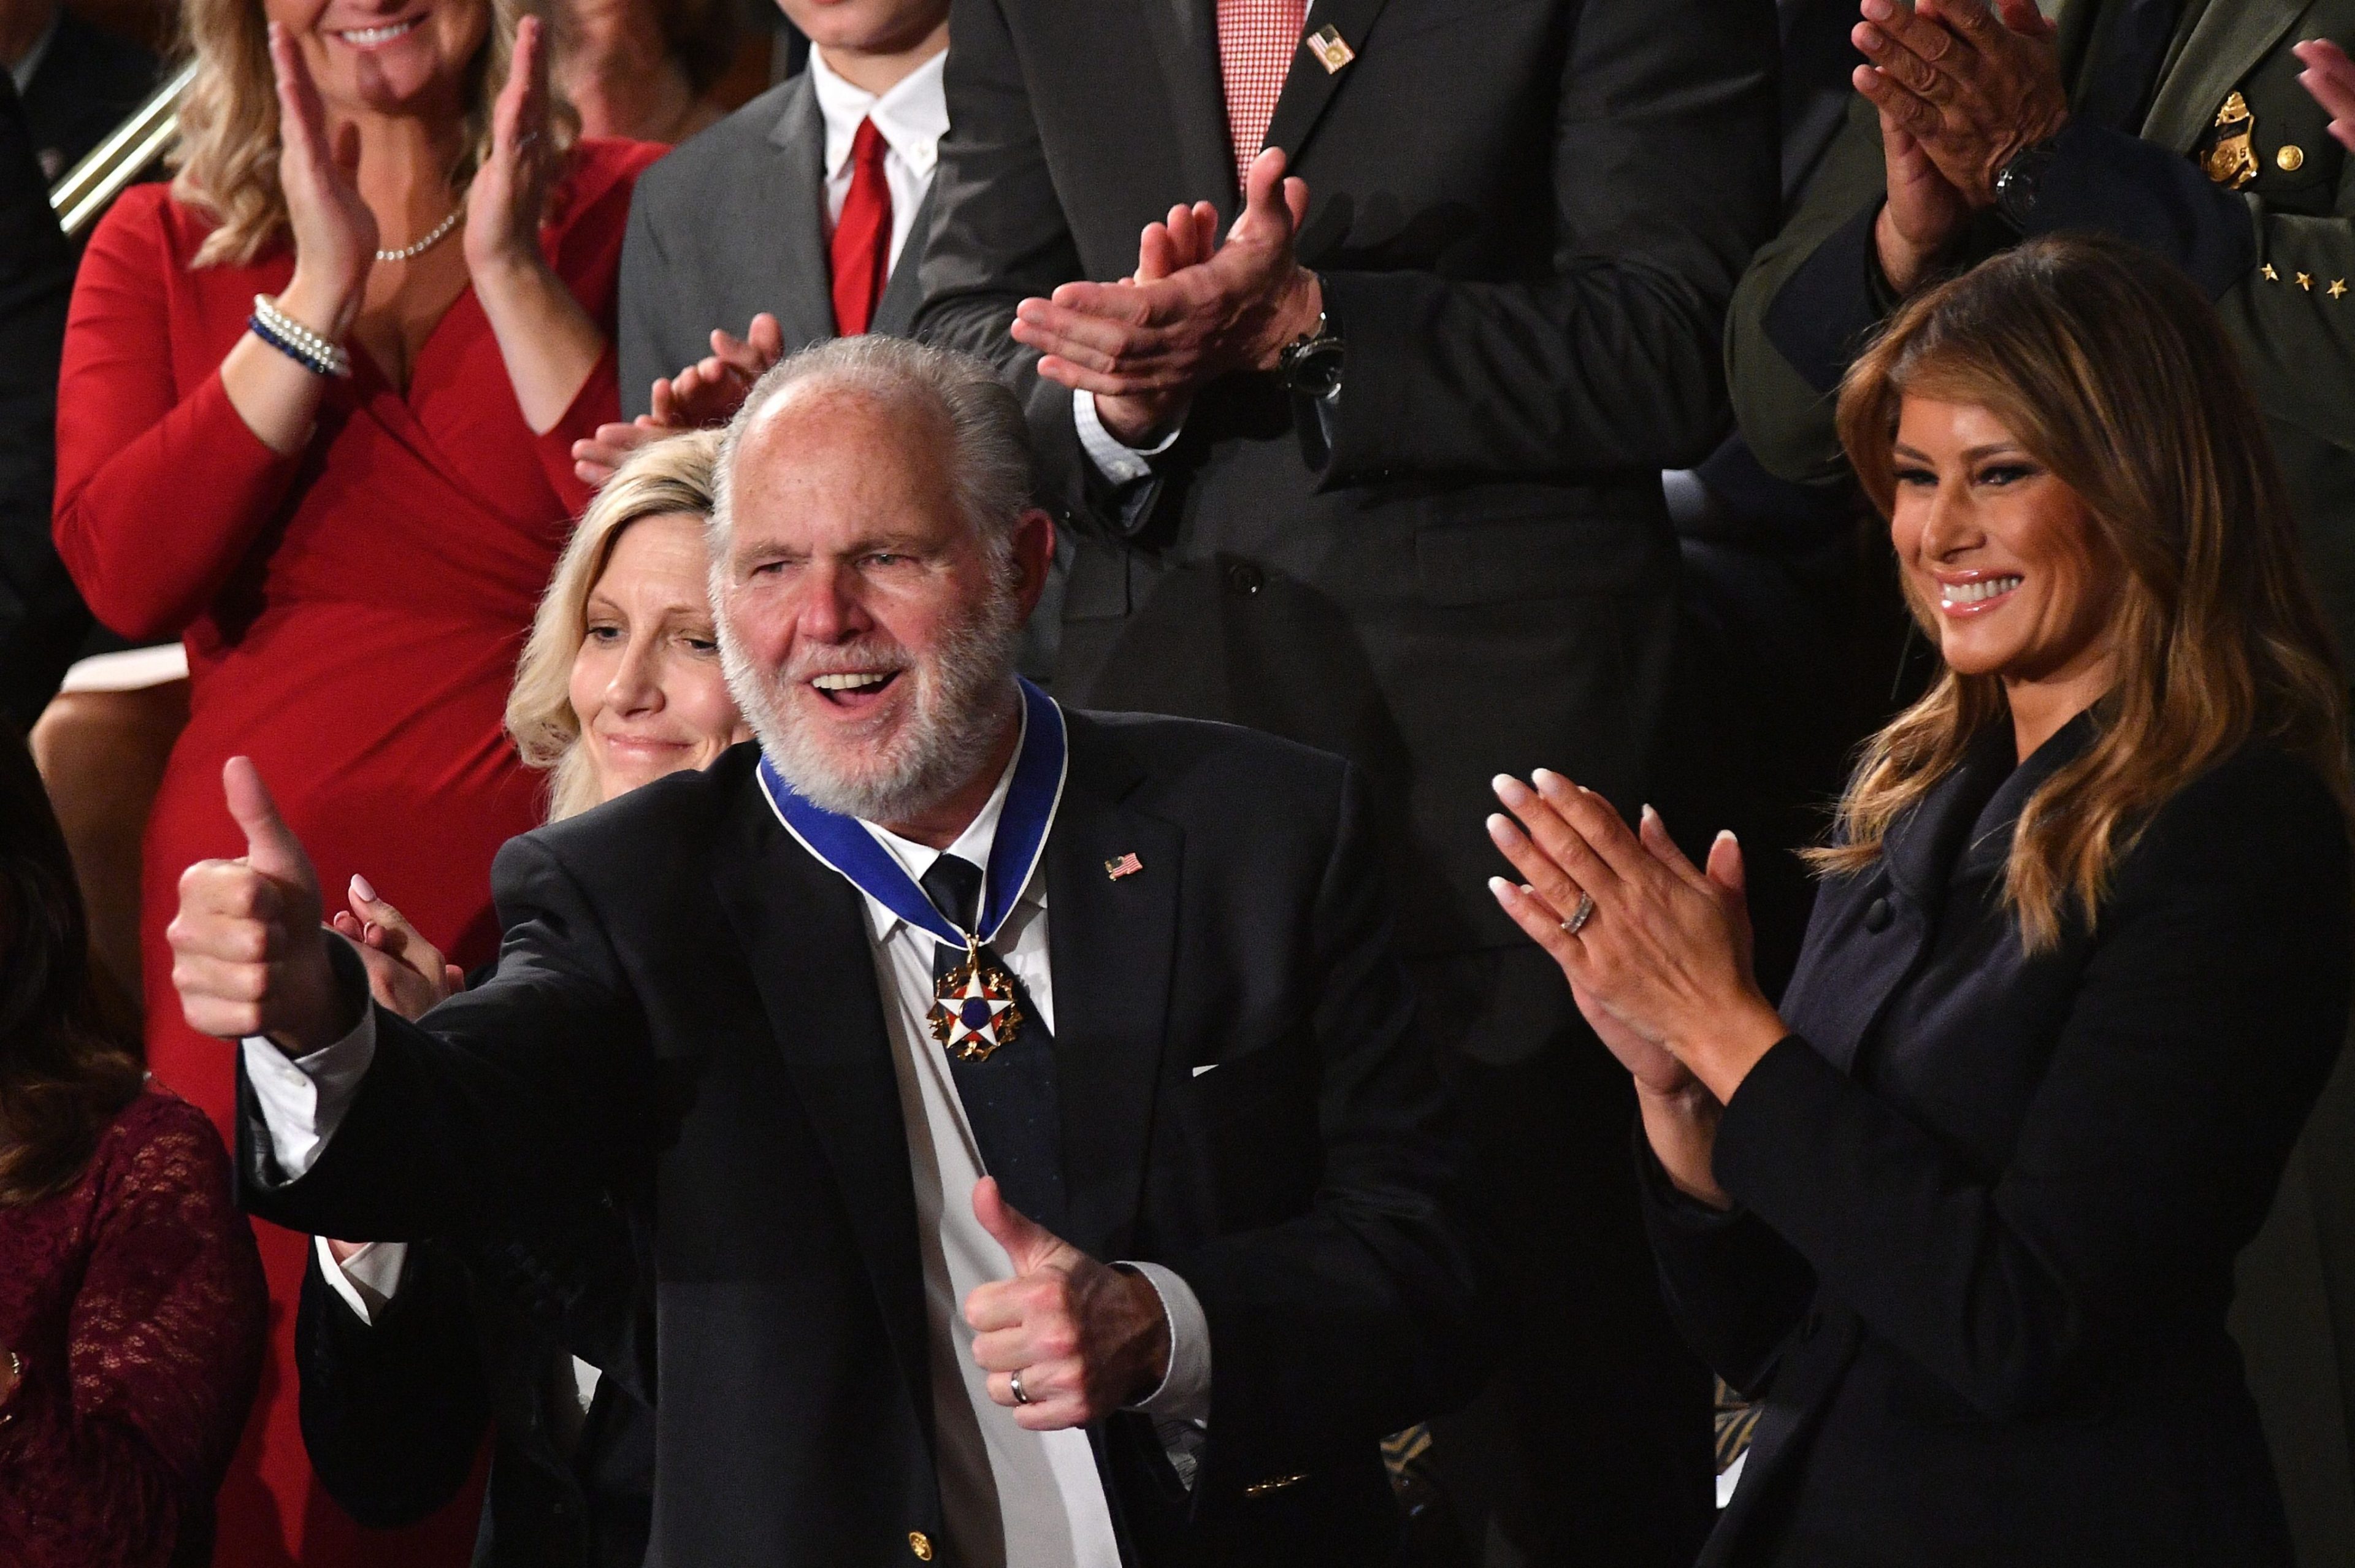 Rush Limbaugh, who has since died, celebrates after receiving the Presidential Medal of Freedom.